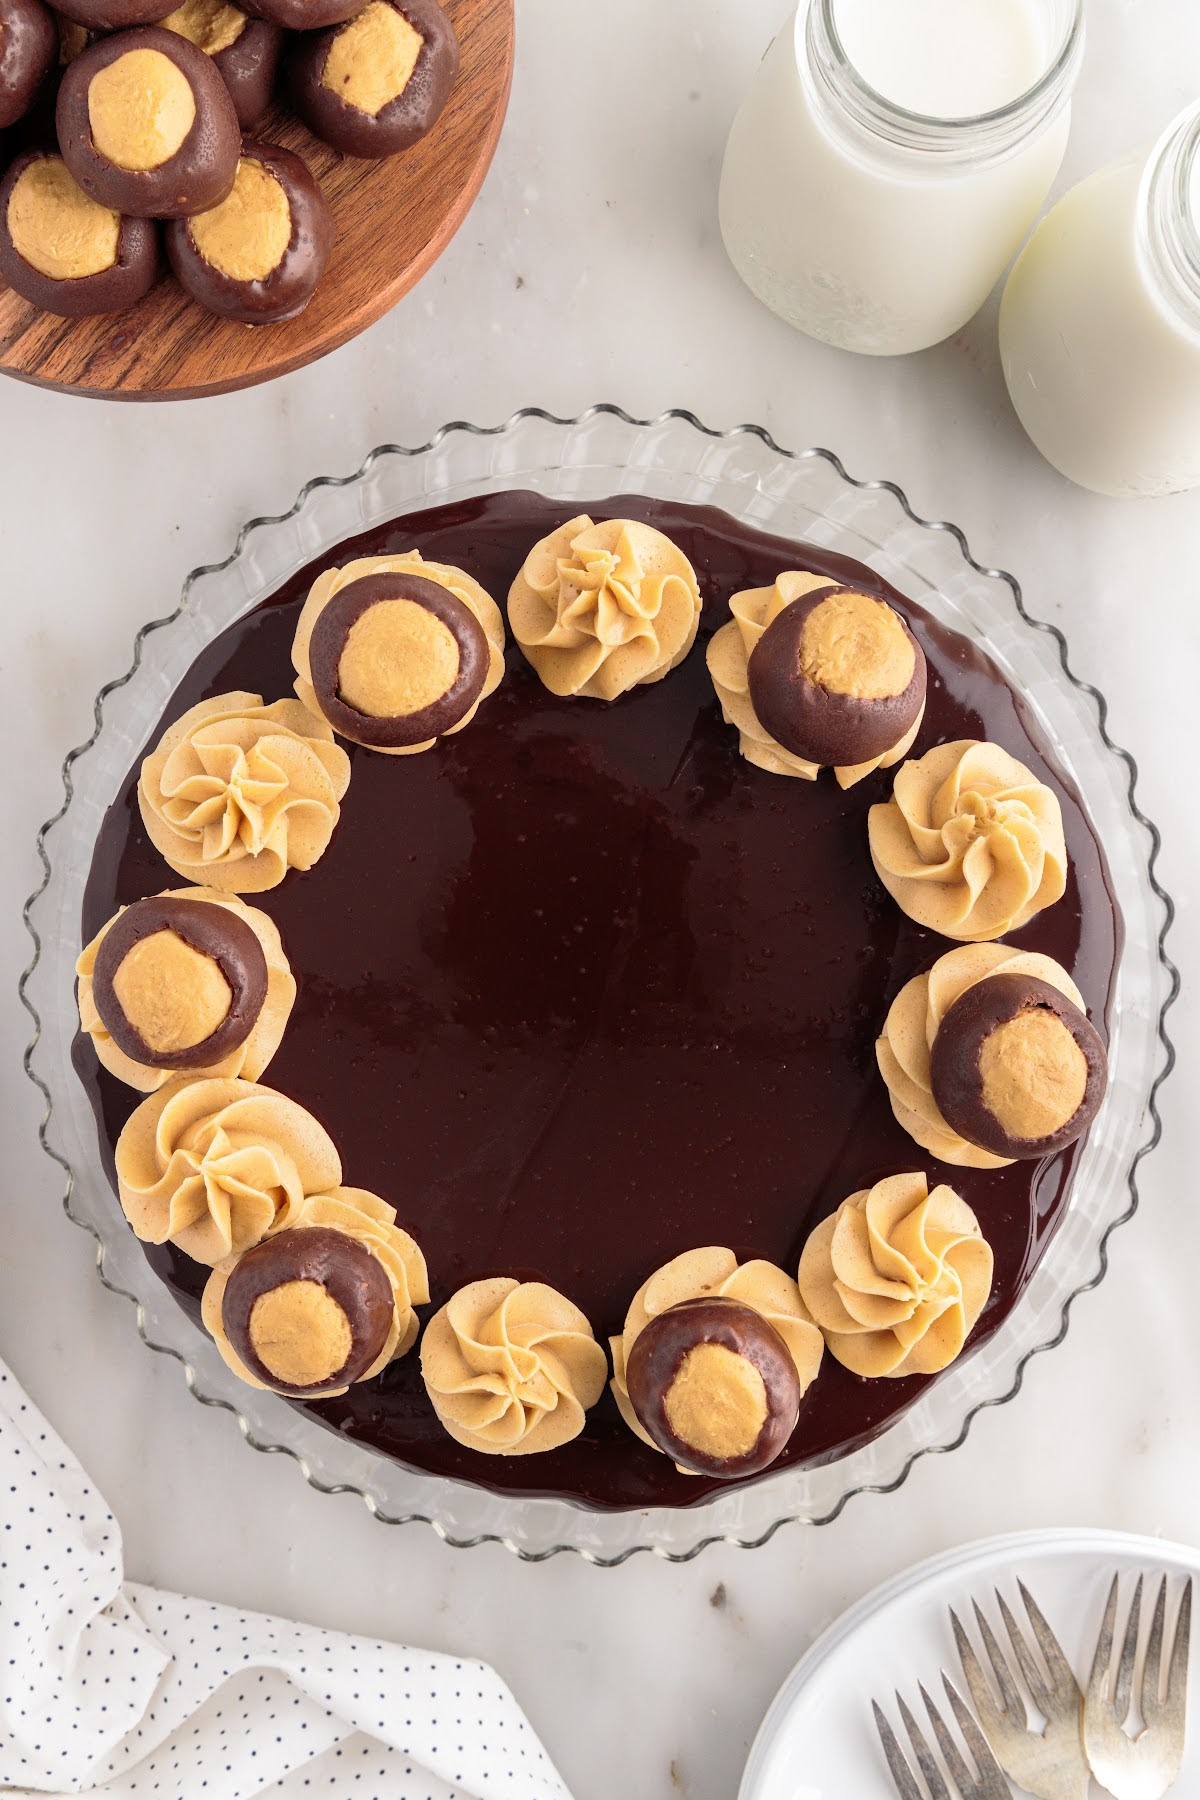 Buckeye cookies placed on every other swirl on the top of the Chocolate Peanut Butter Cheesecake.